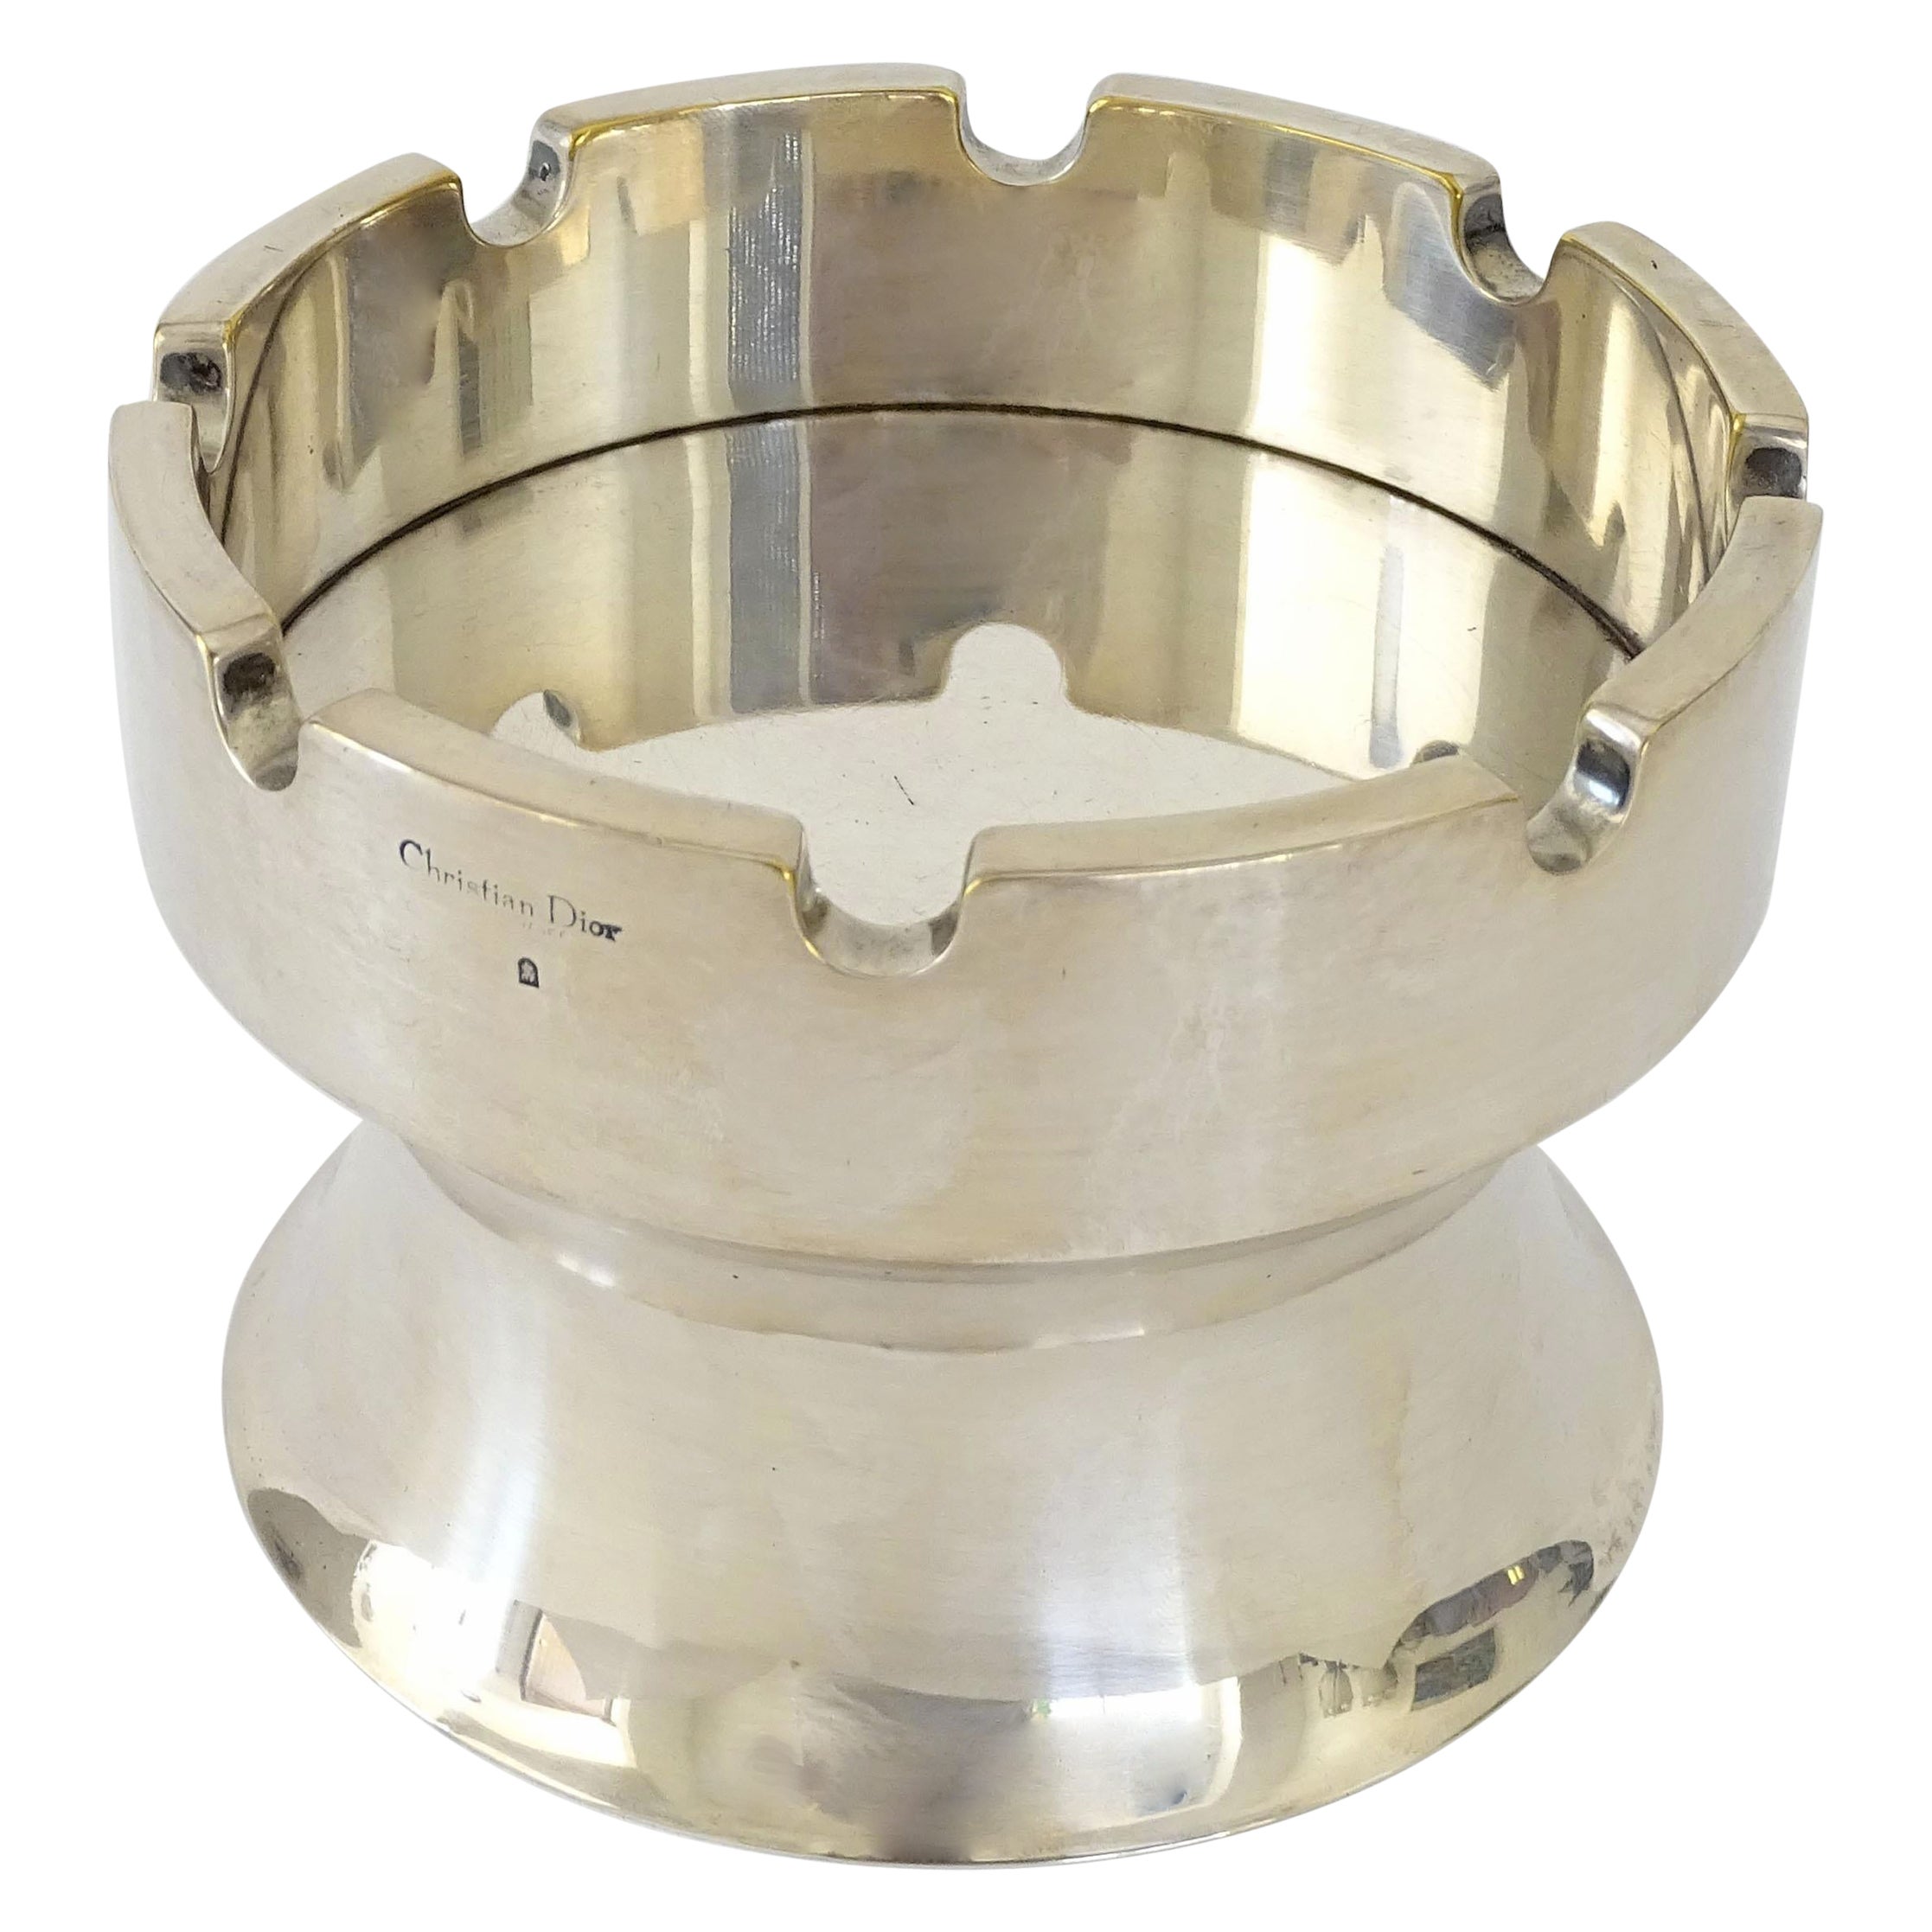 Christian Dior silver metal rook shaped Ashtray, France 1960s For Sale